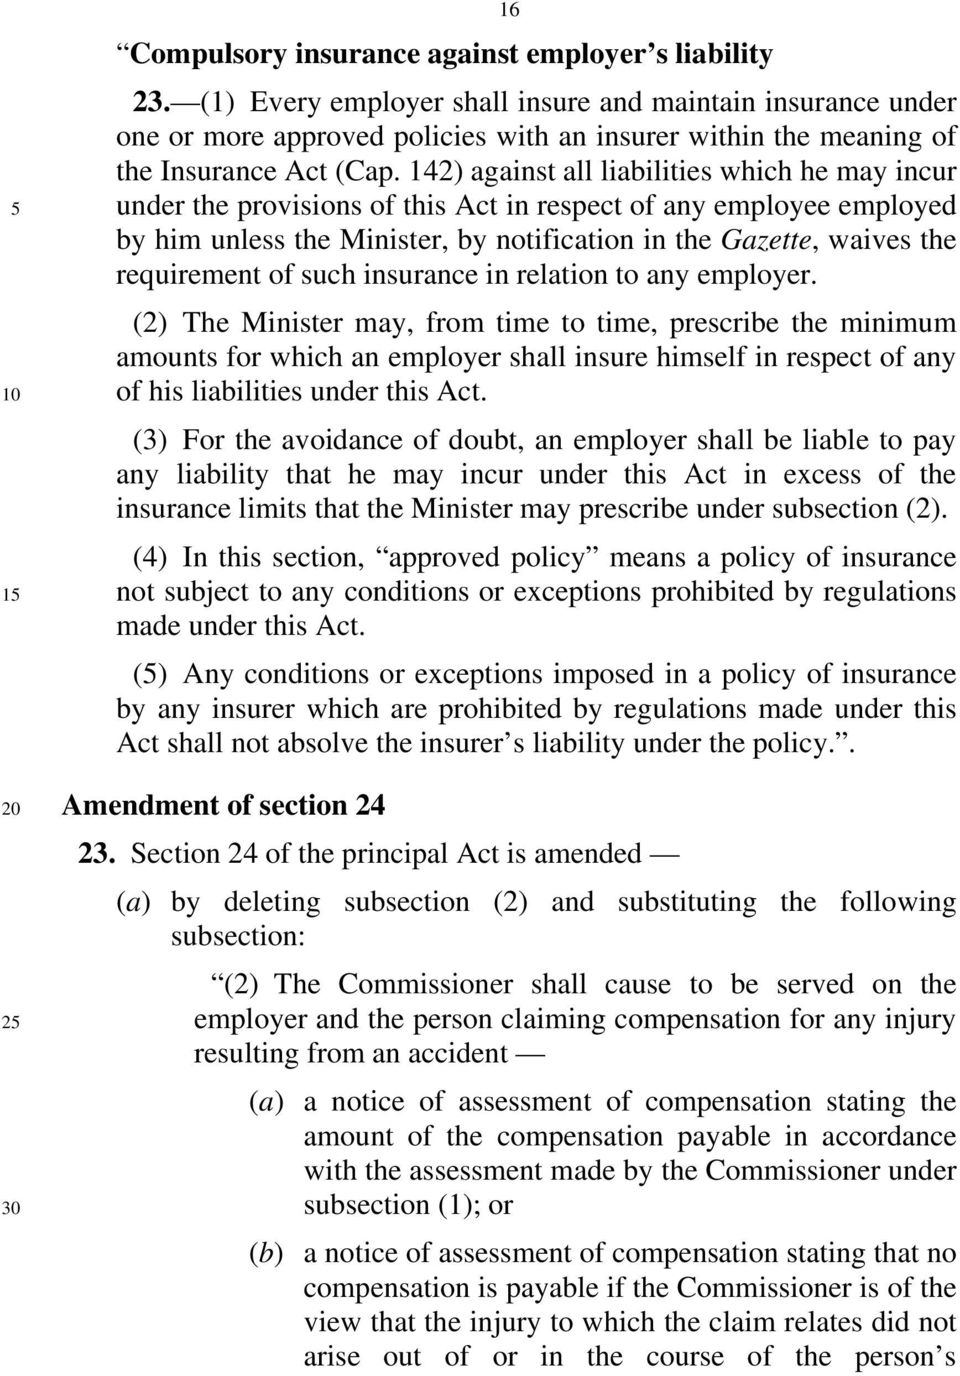 142) against all liabilities which he may incur under the provisions of this Act in respect of any employee employed by him unless the Minister, by notification in the Gazette, waives the requirement